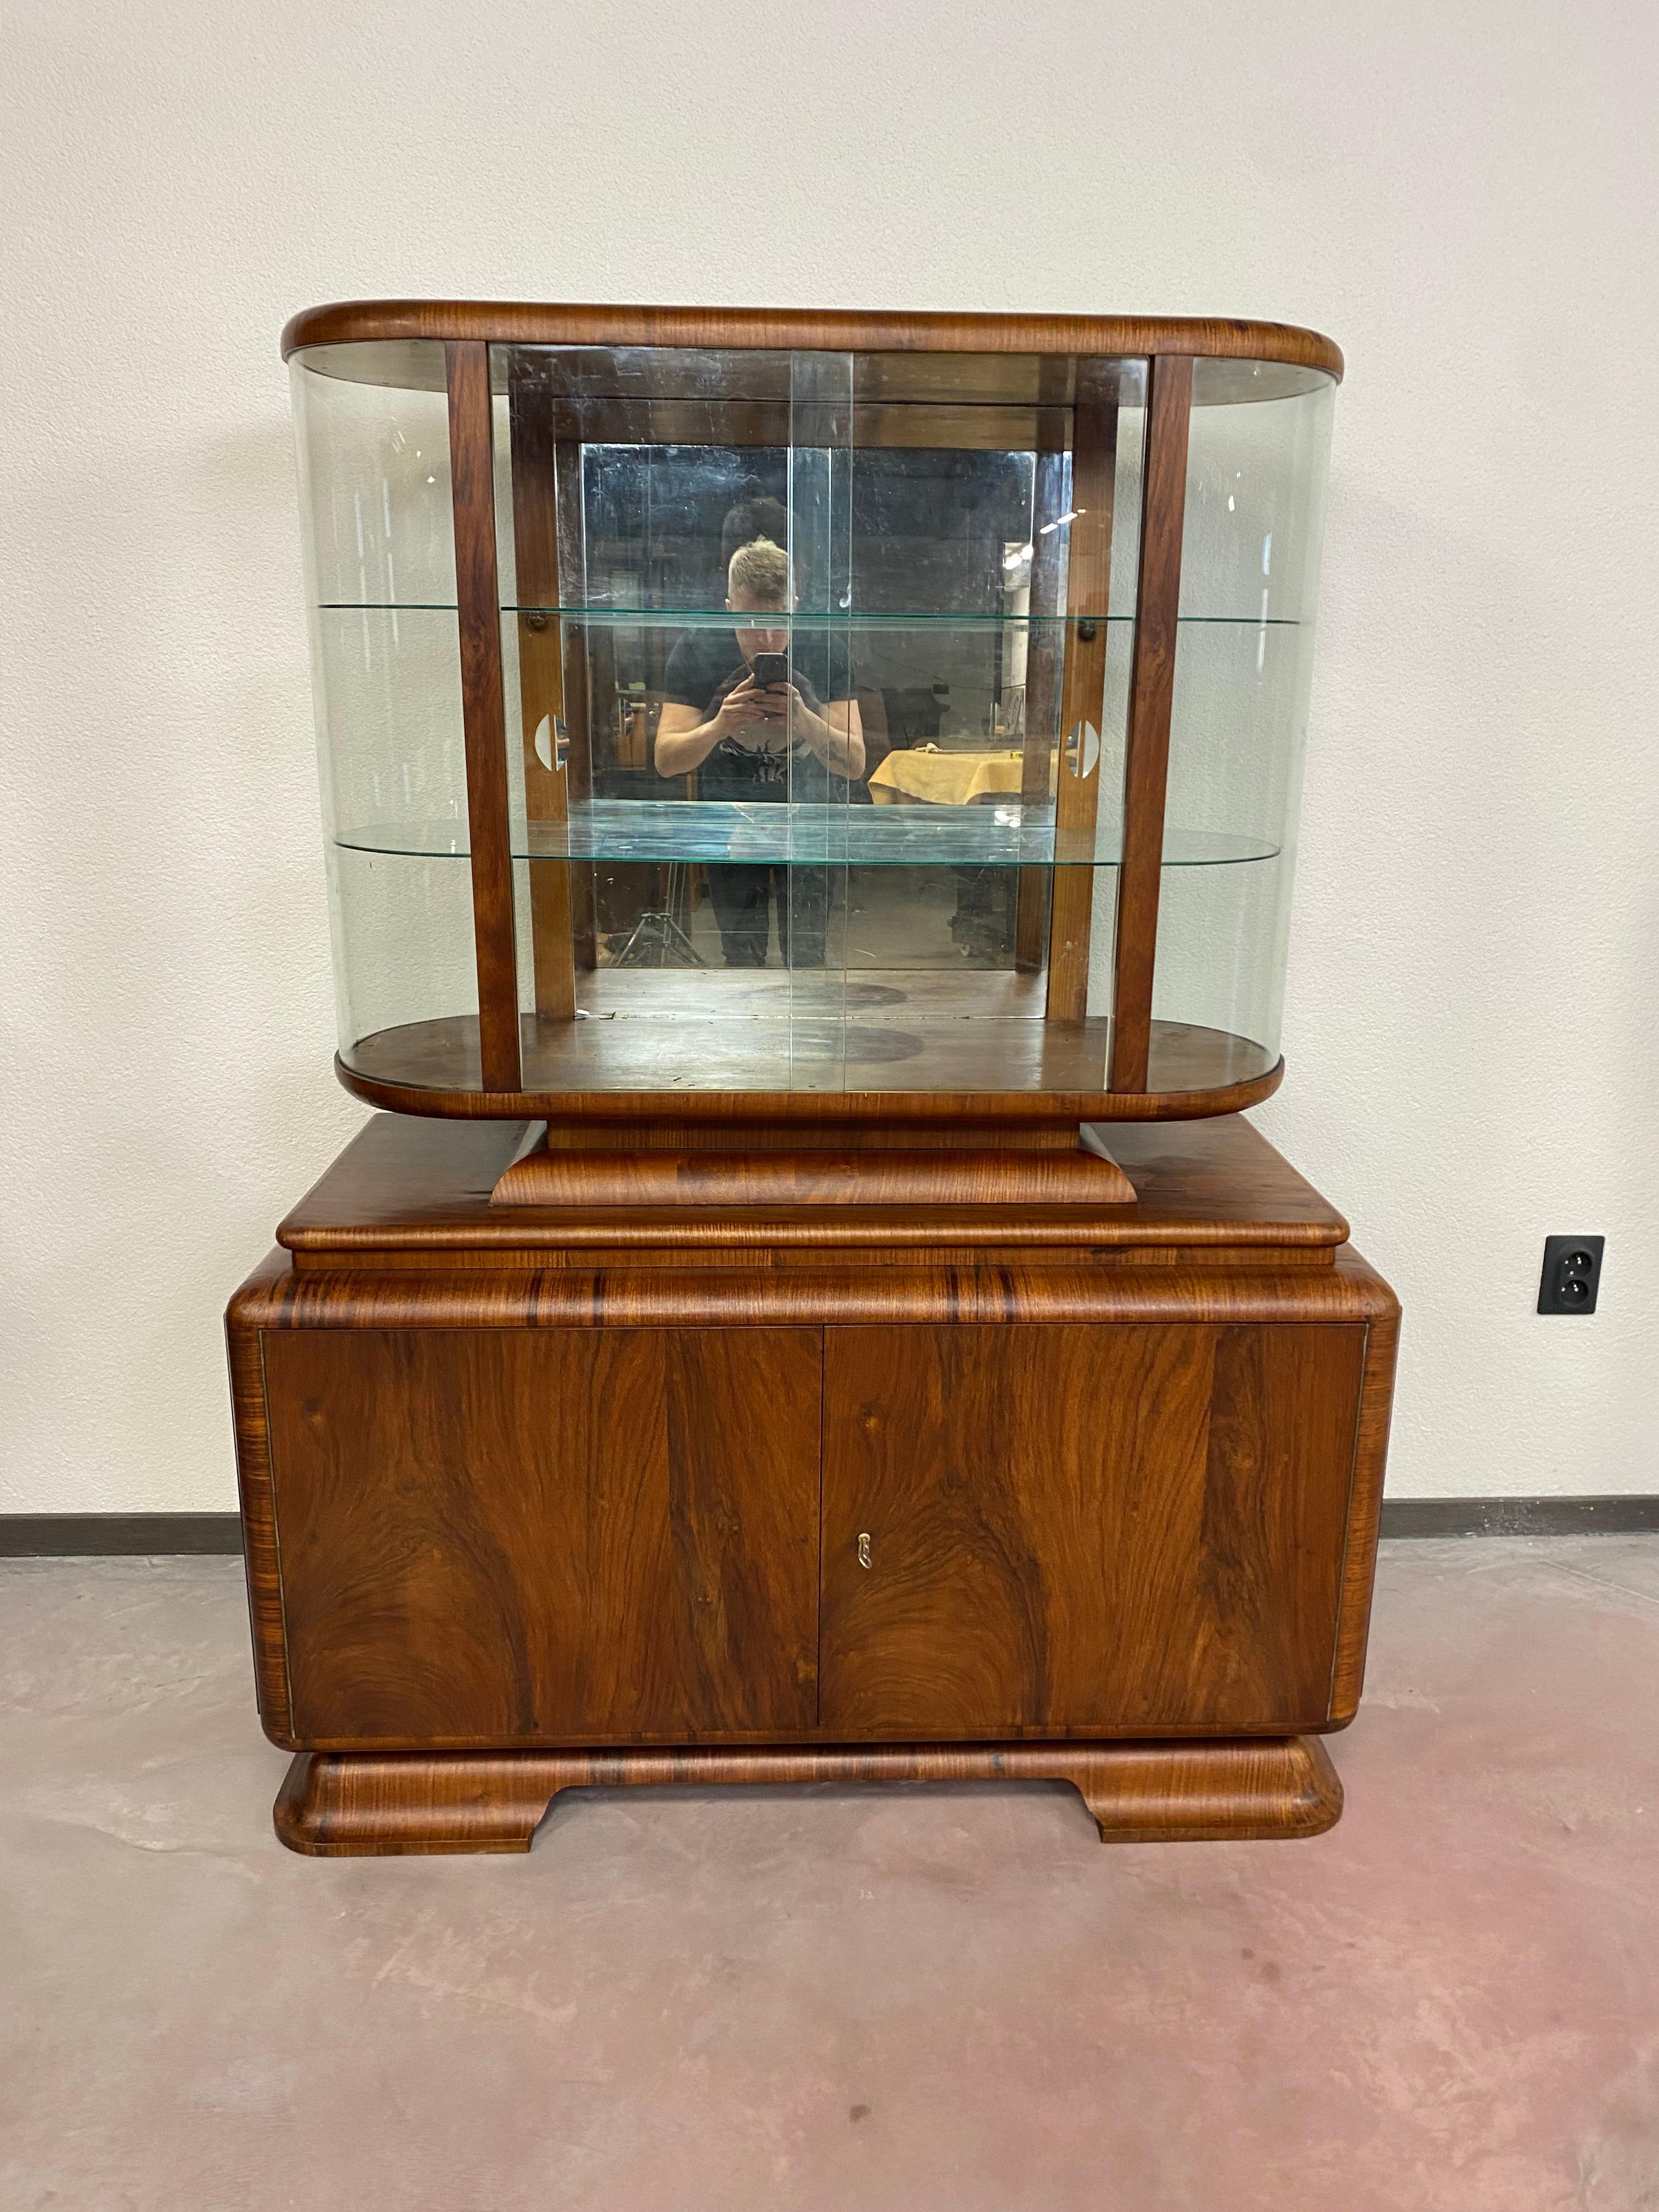 Art deco walnut showcase in very good condition with signs of usage.